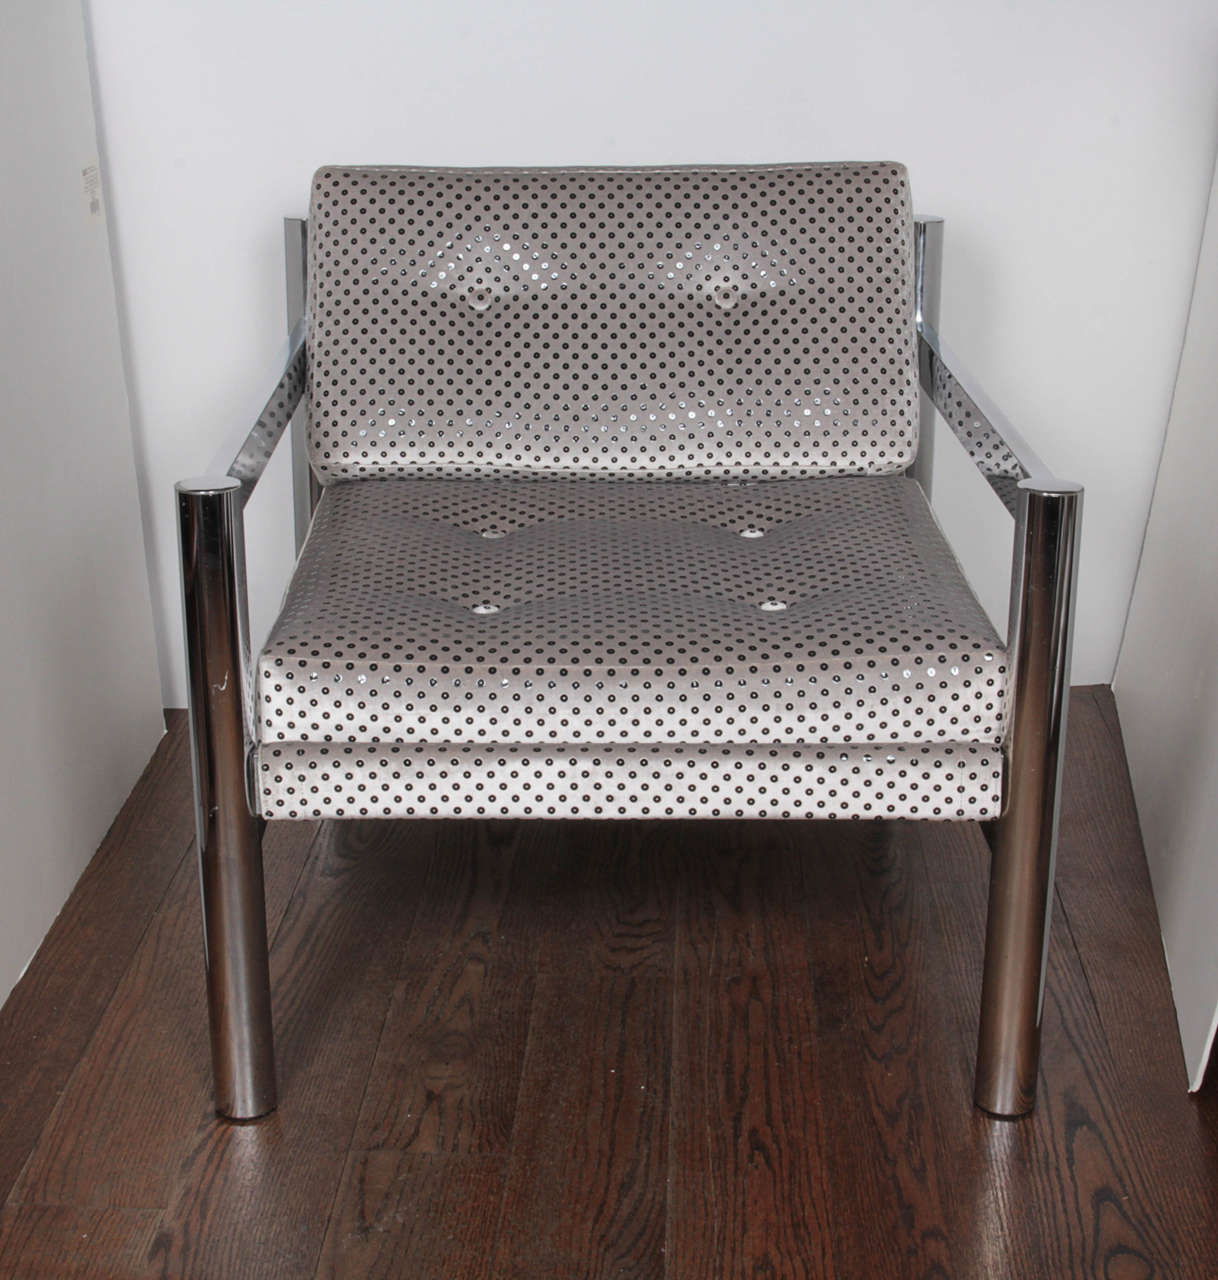 A 70's chrome tubular chair newly upholstered in a sexy silvery-grey Stark 